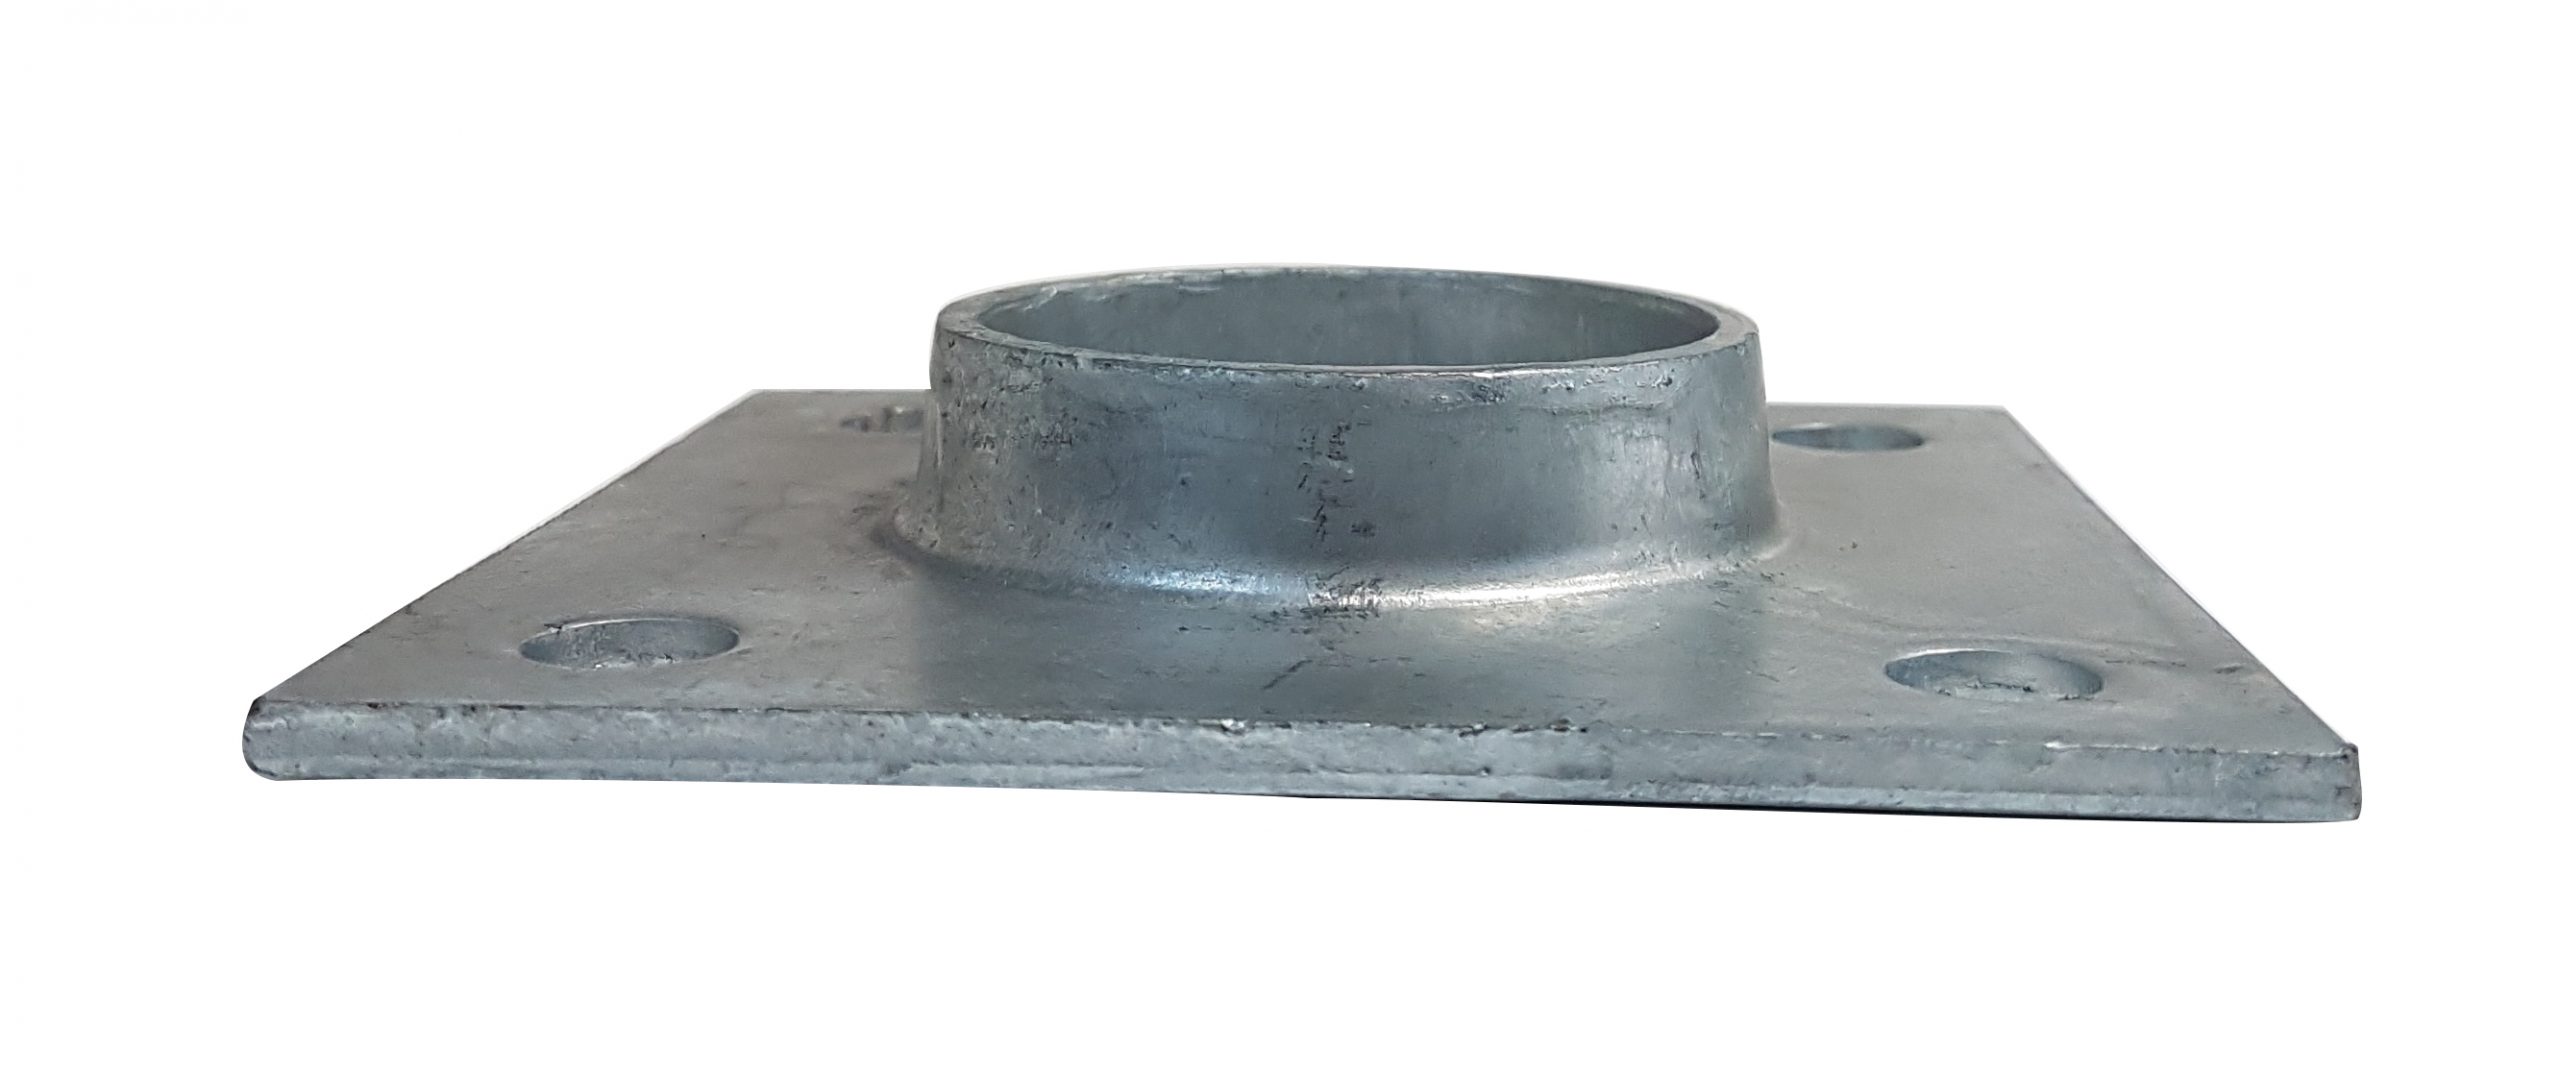 UNIFORM SAFETY 150X150MM BASE PLATE TO SUIT SP28NEEDS WELDING TO POST